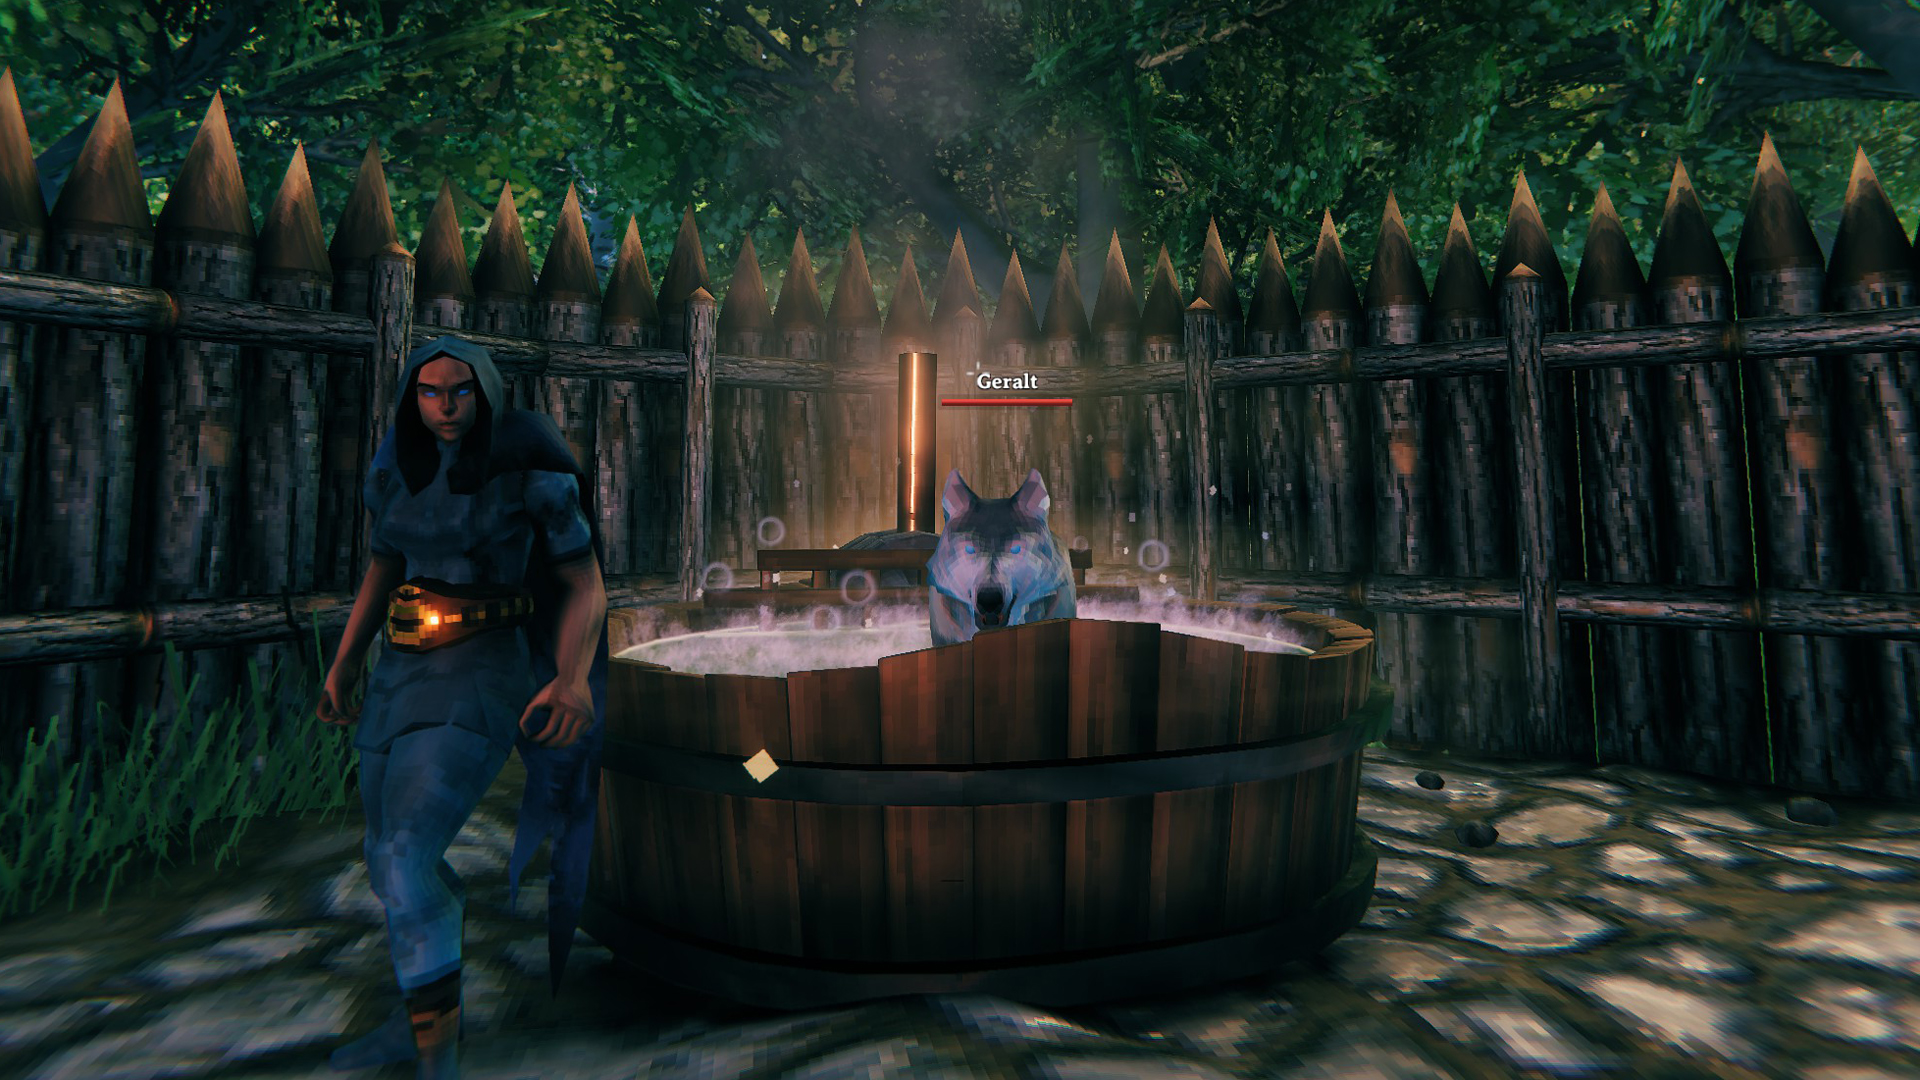 A wolf named 'Geralt' is hanging out in the Valheim hot tub.